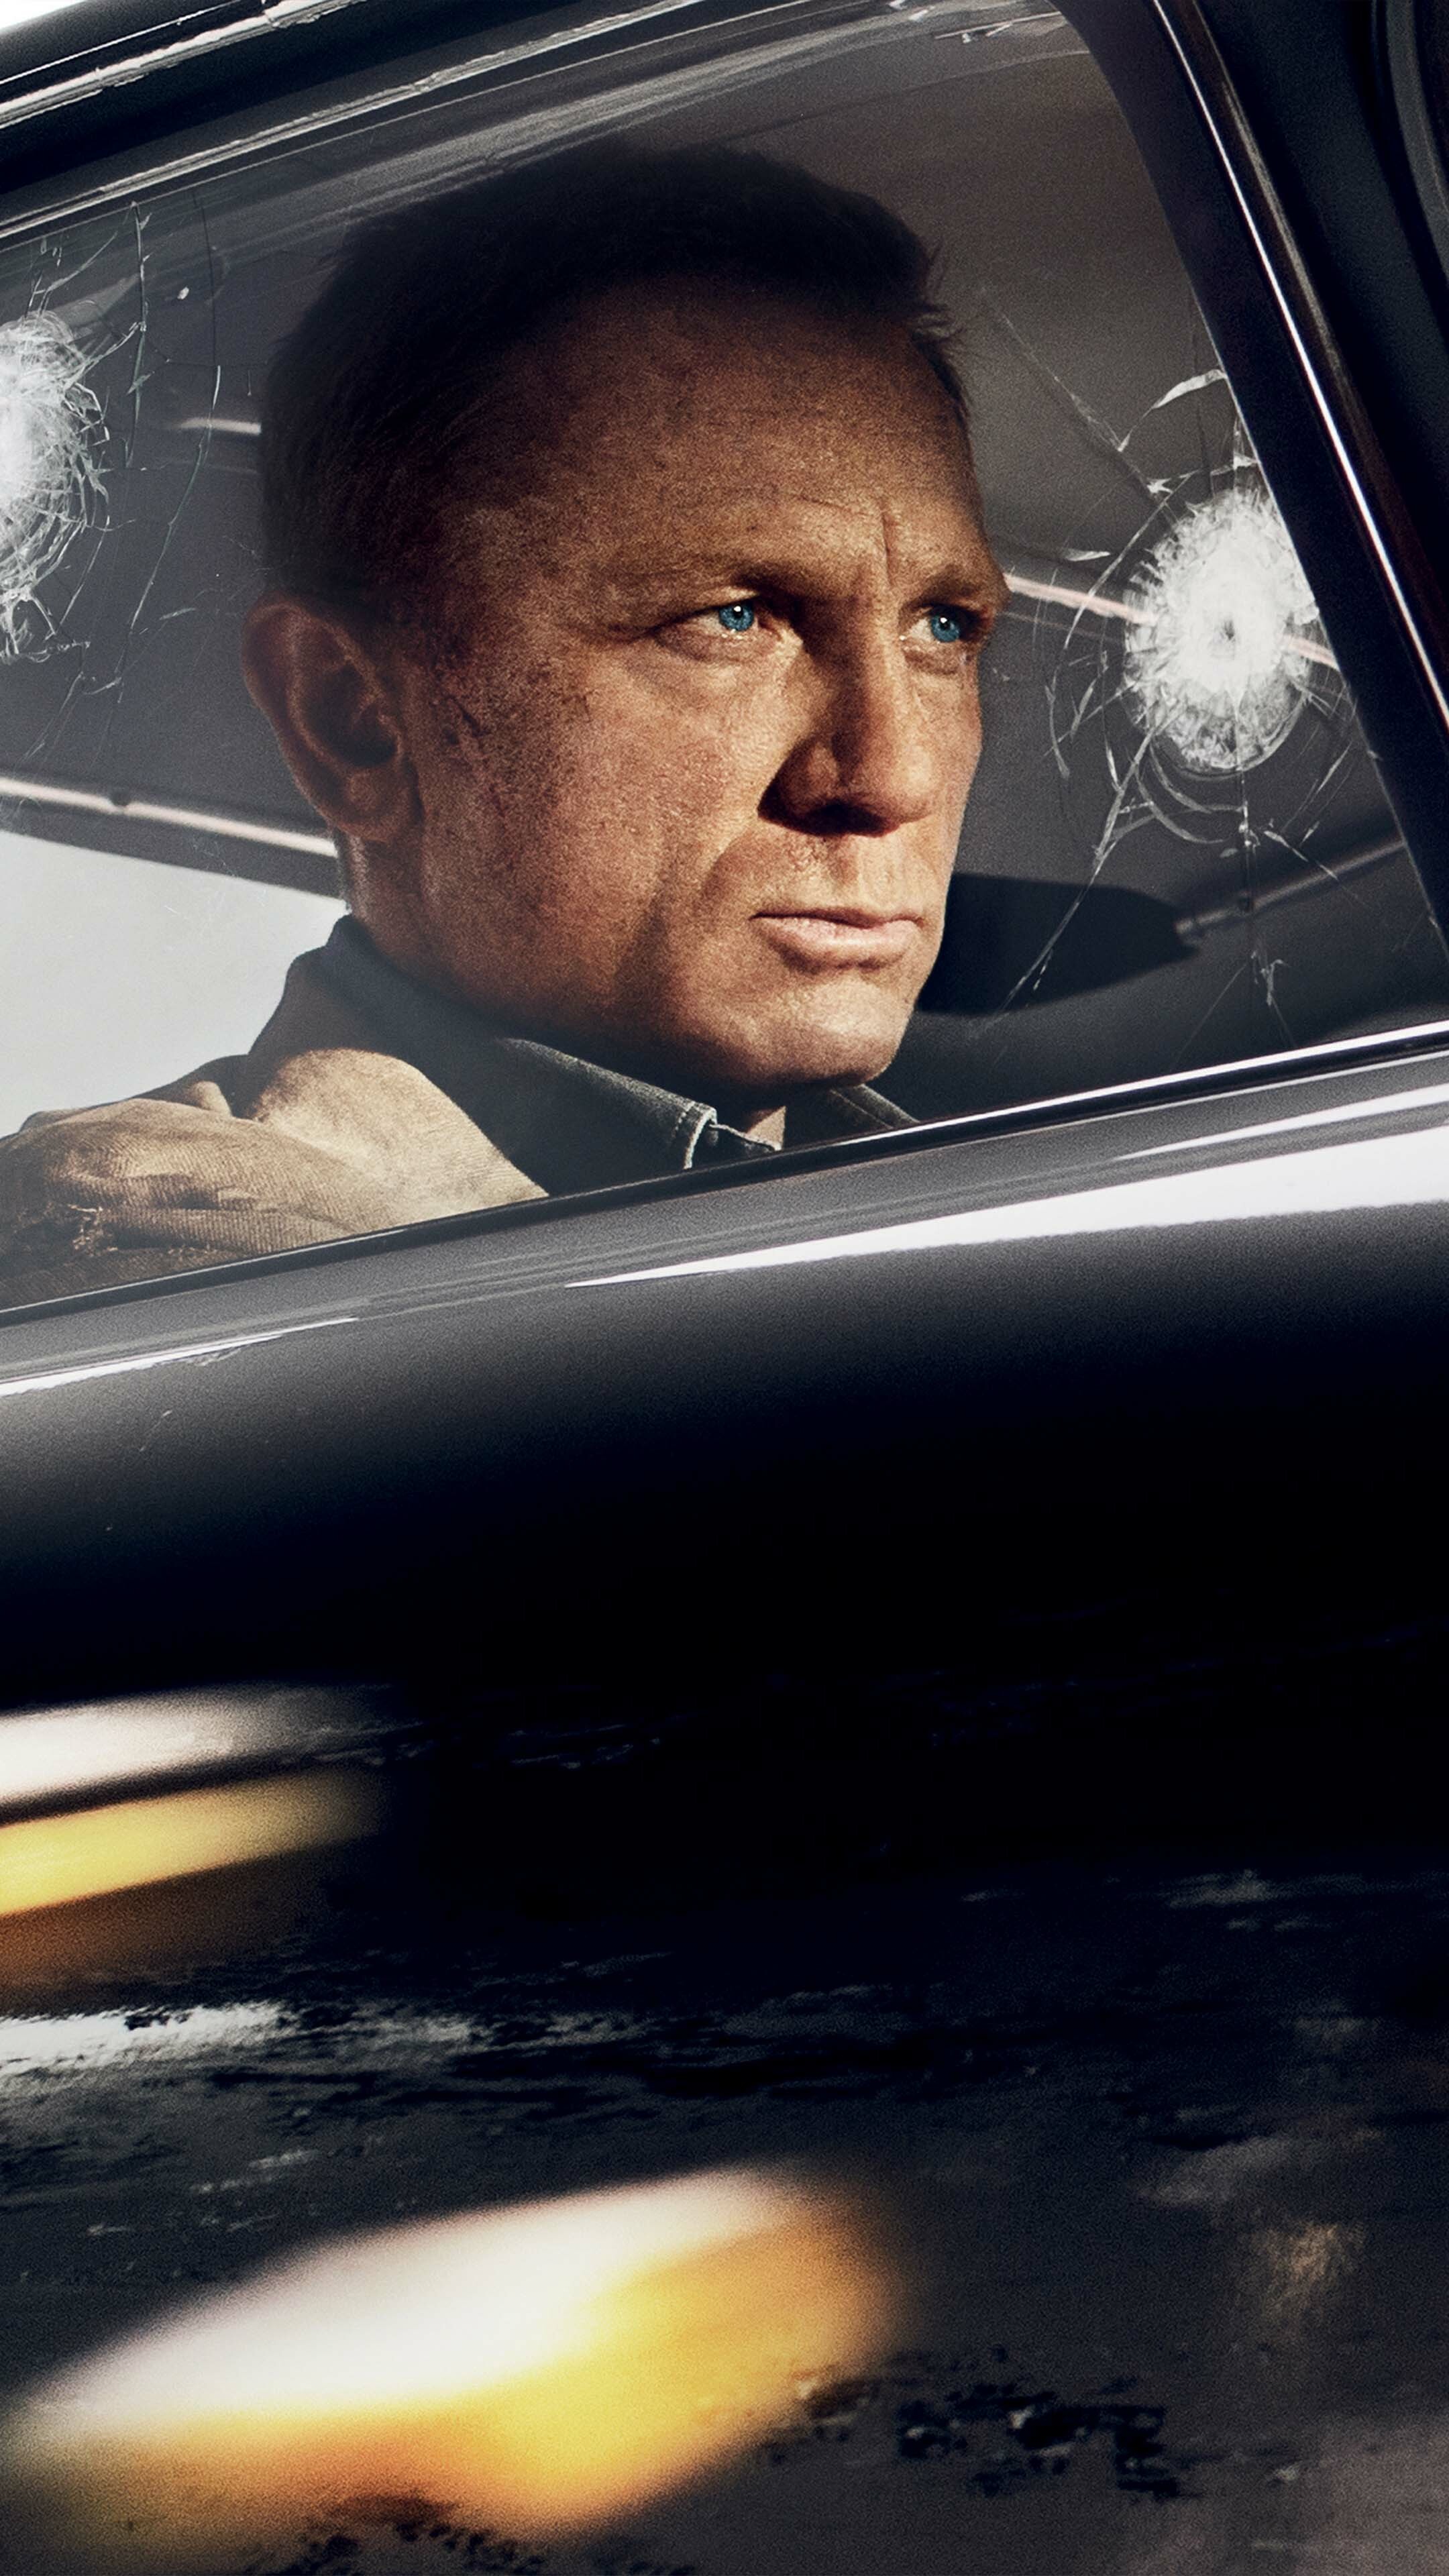 James Bond: No Time To Die, Starring Daniel Craig in his fifth and final portrayal of fictional British MI6 agent 007. 2160x3840 4K Background.